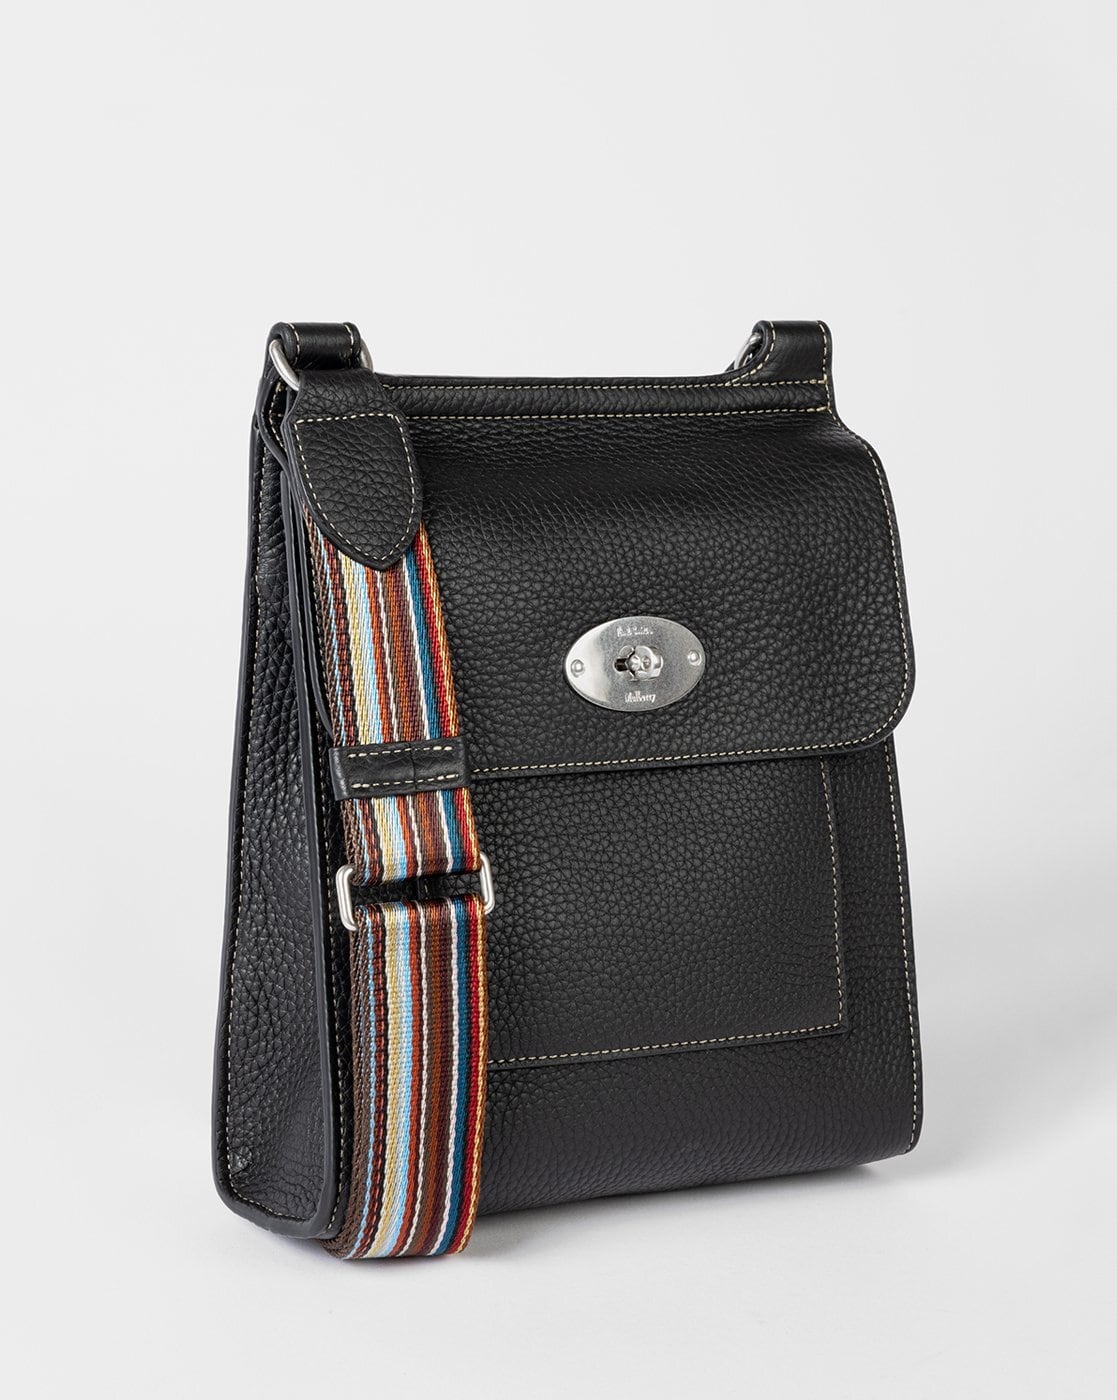 Mulberry x Paul Smith Leather Bag Collection - Sportskeeda Stories